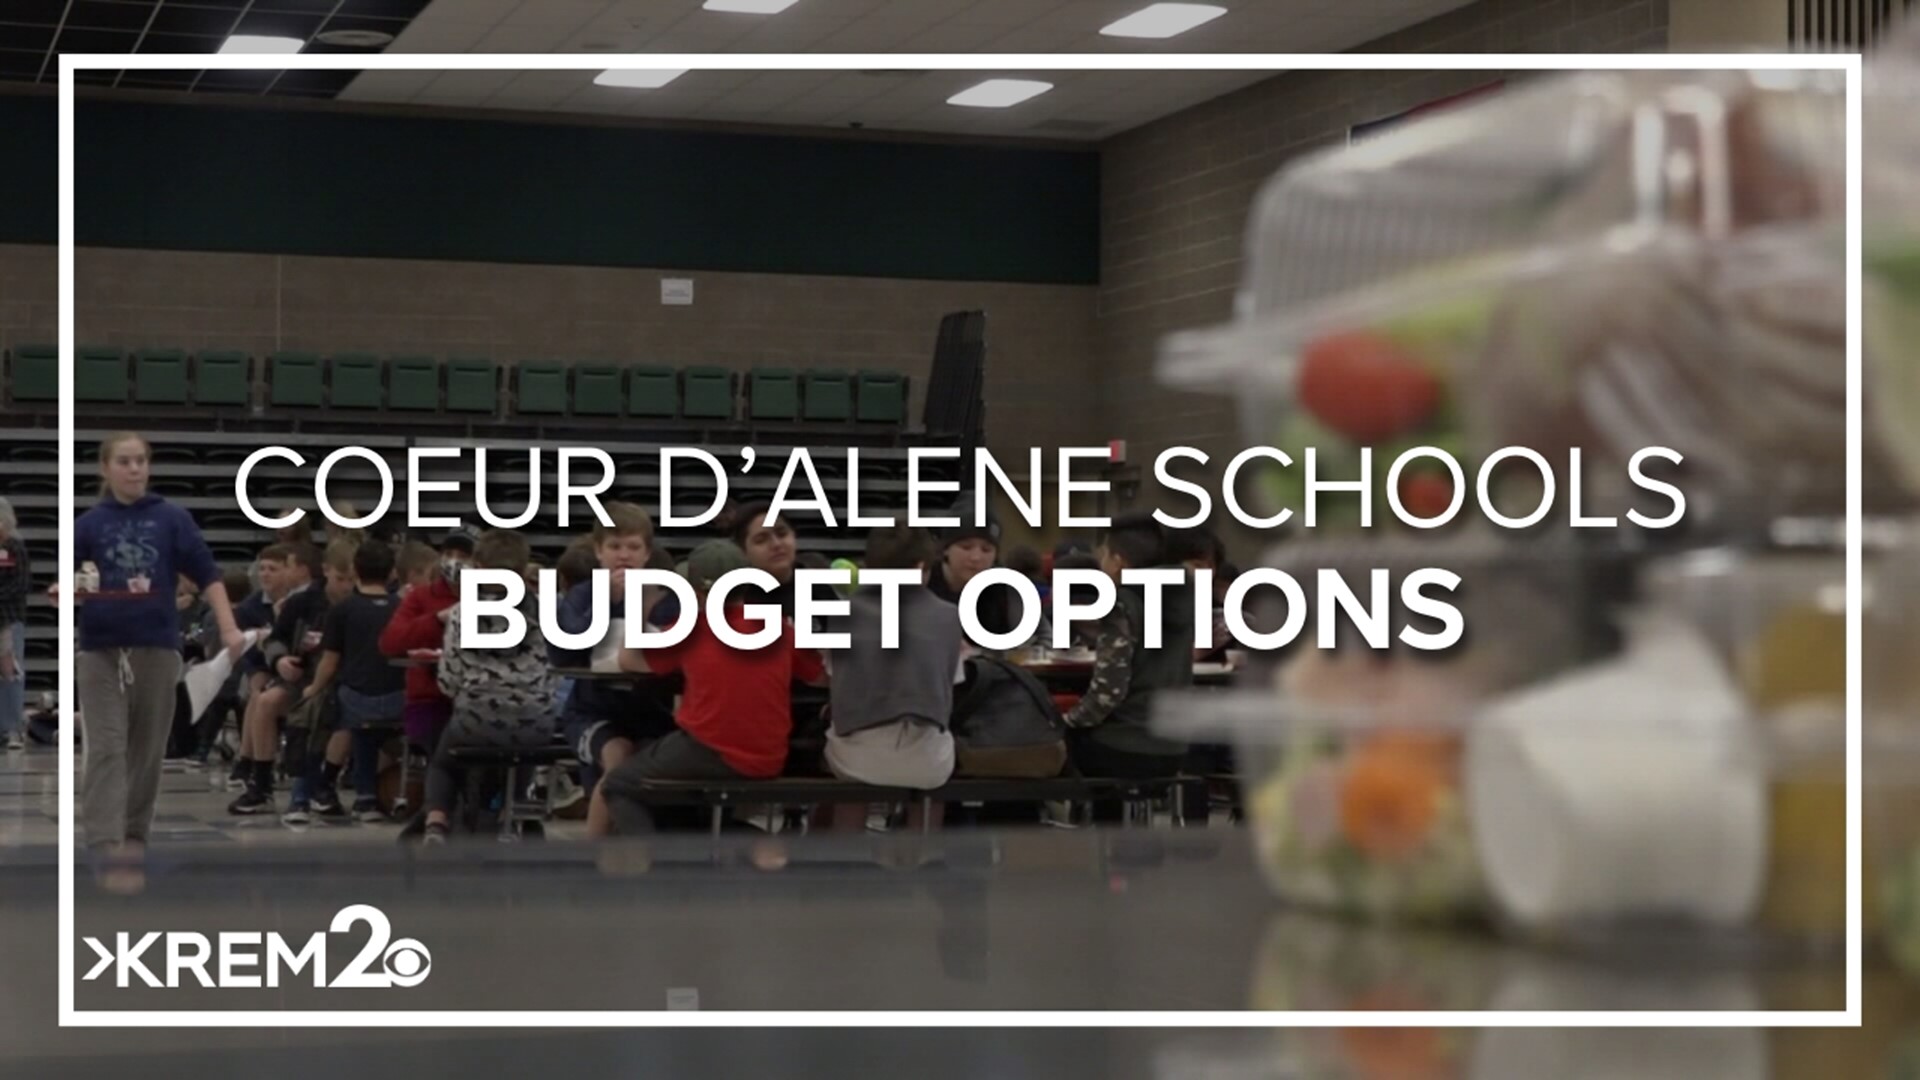 Some of the options the district is considering include a four-day school week, closing an elementary school, implementing larger class sizes and staff cuts.